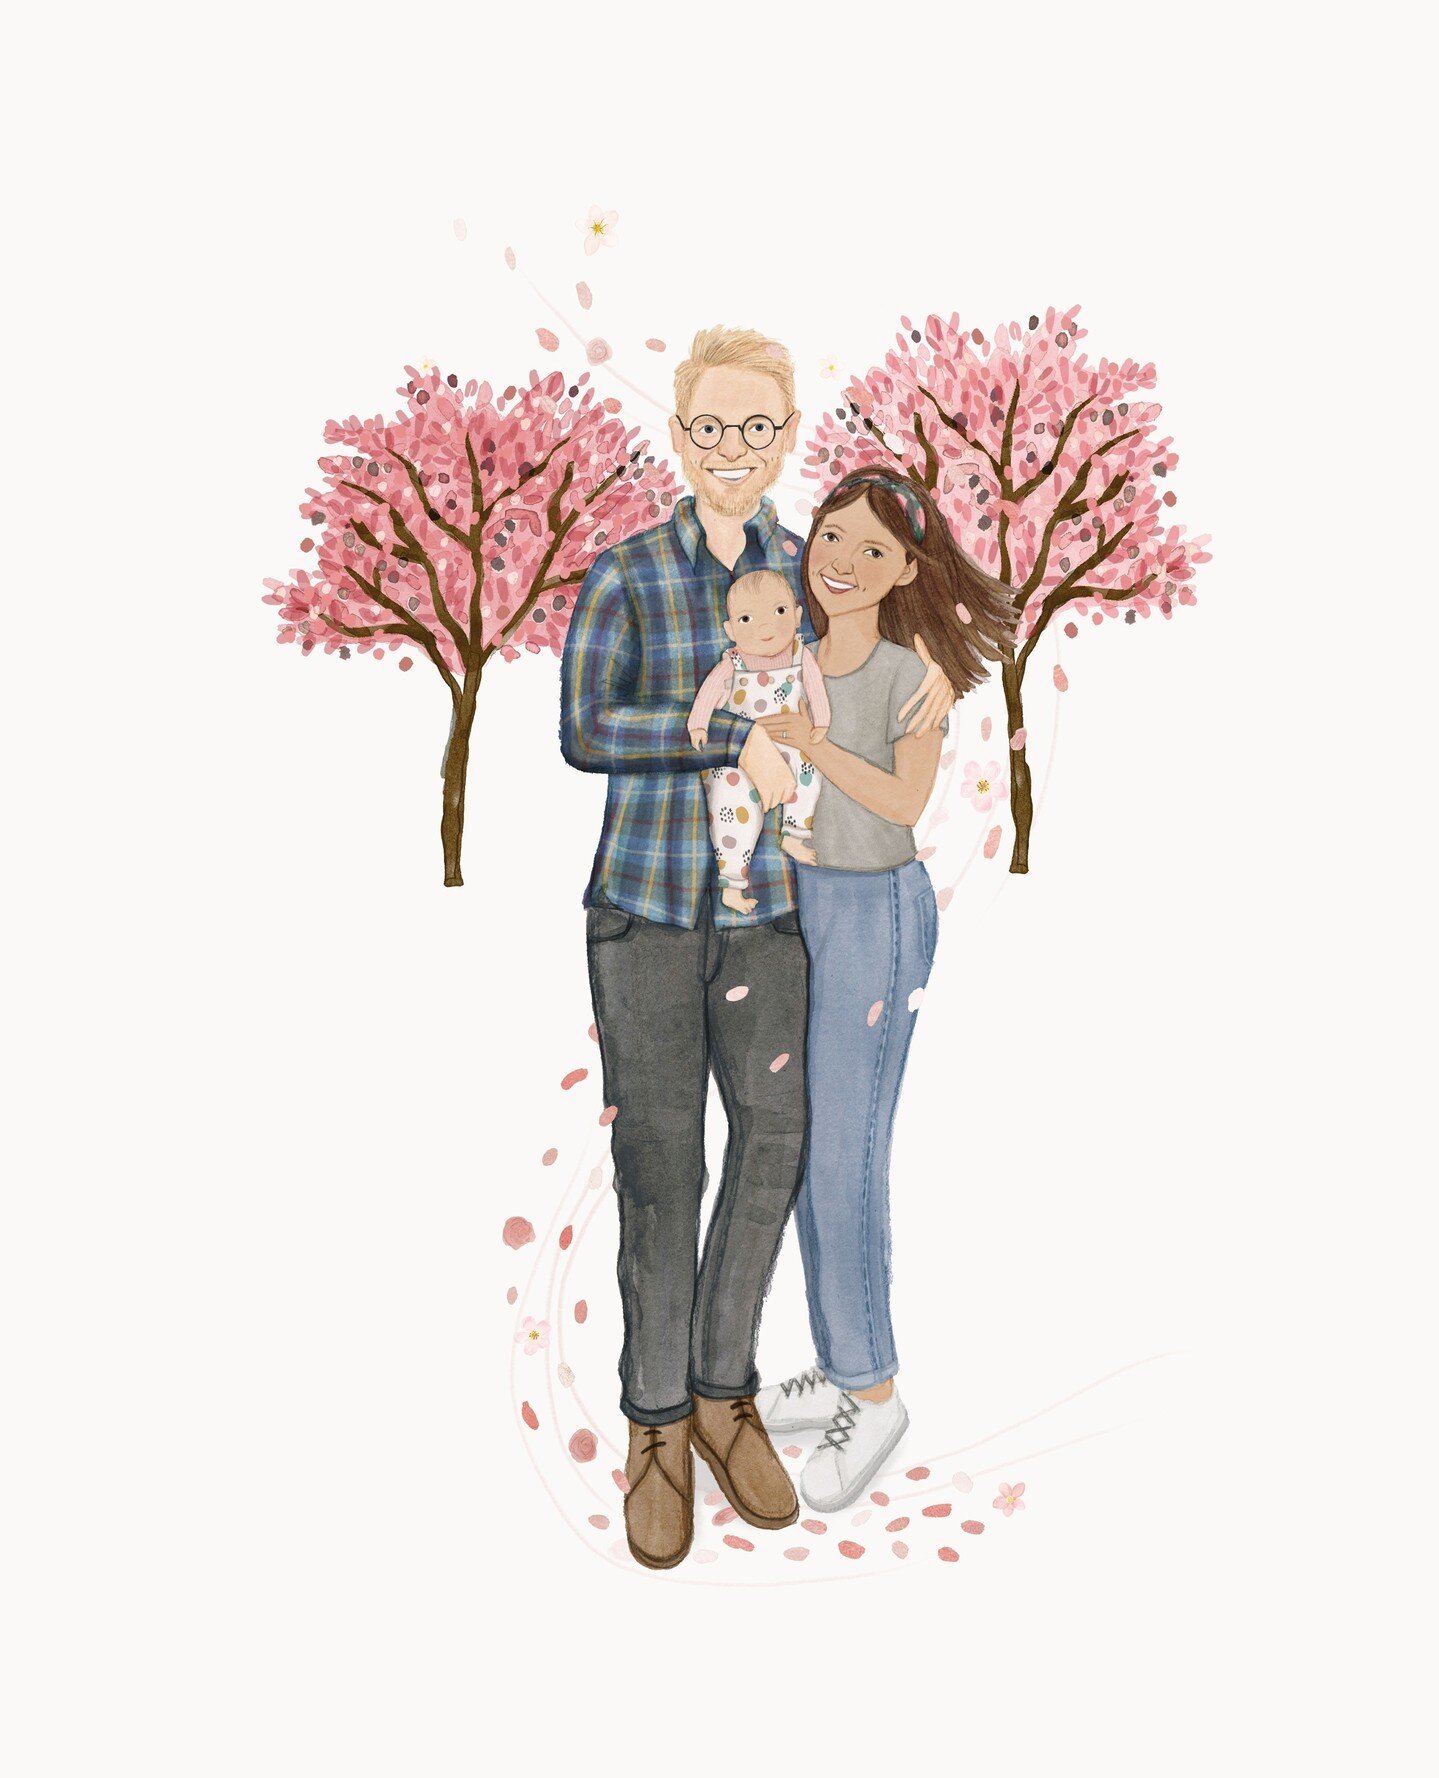 Working on this portrait reminded me of the street where I grew up. The road was lined with cherry trees and each year, near my birthday, the road would be covered in fluttering pink petals. Beautiful! These lovely trees also mean a lot to the lovely